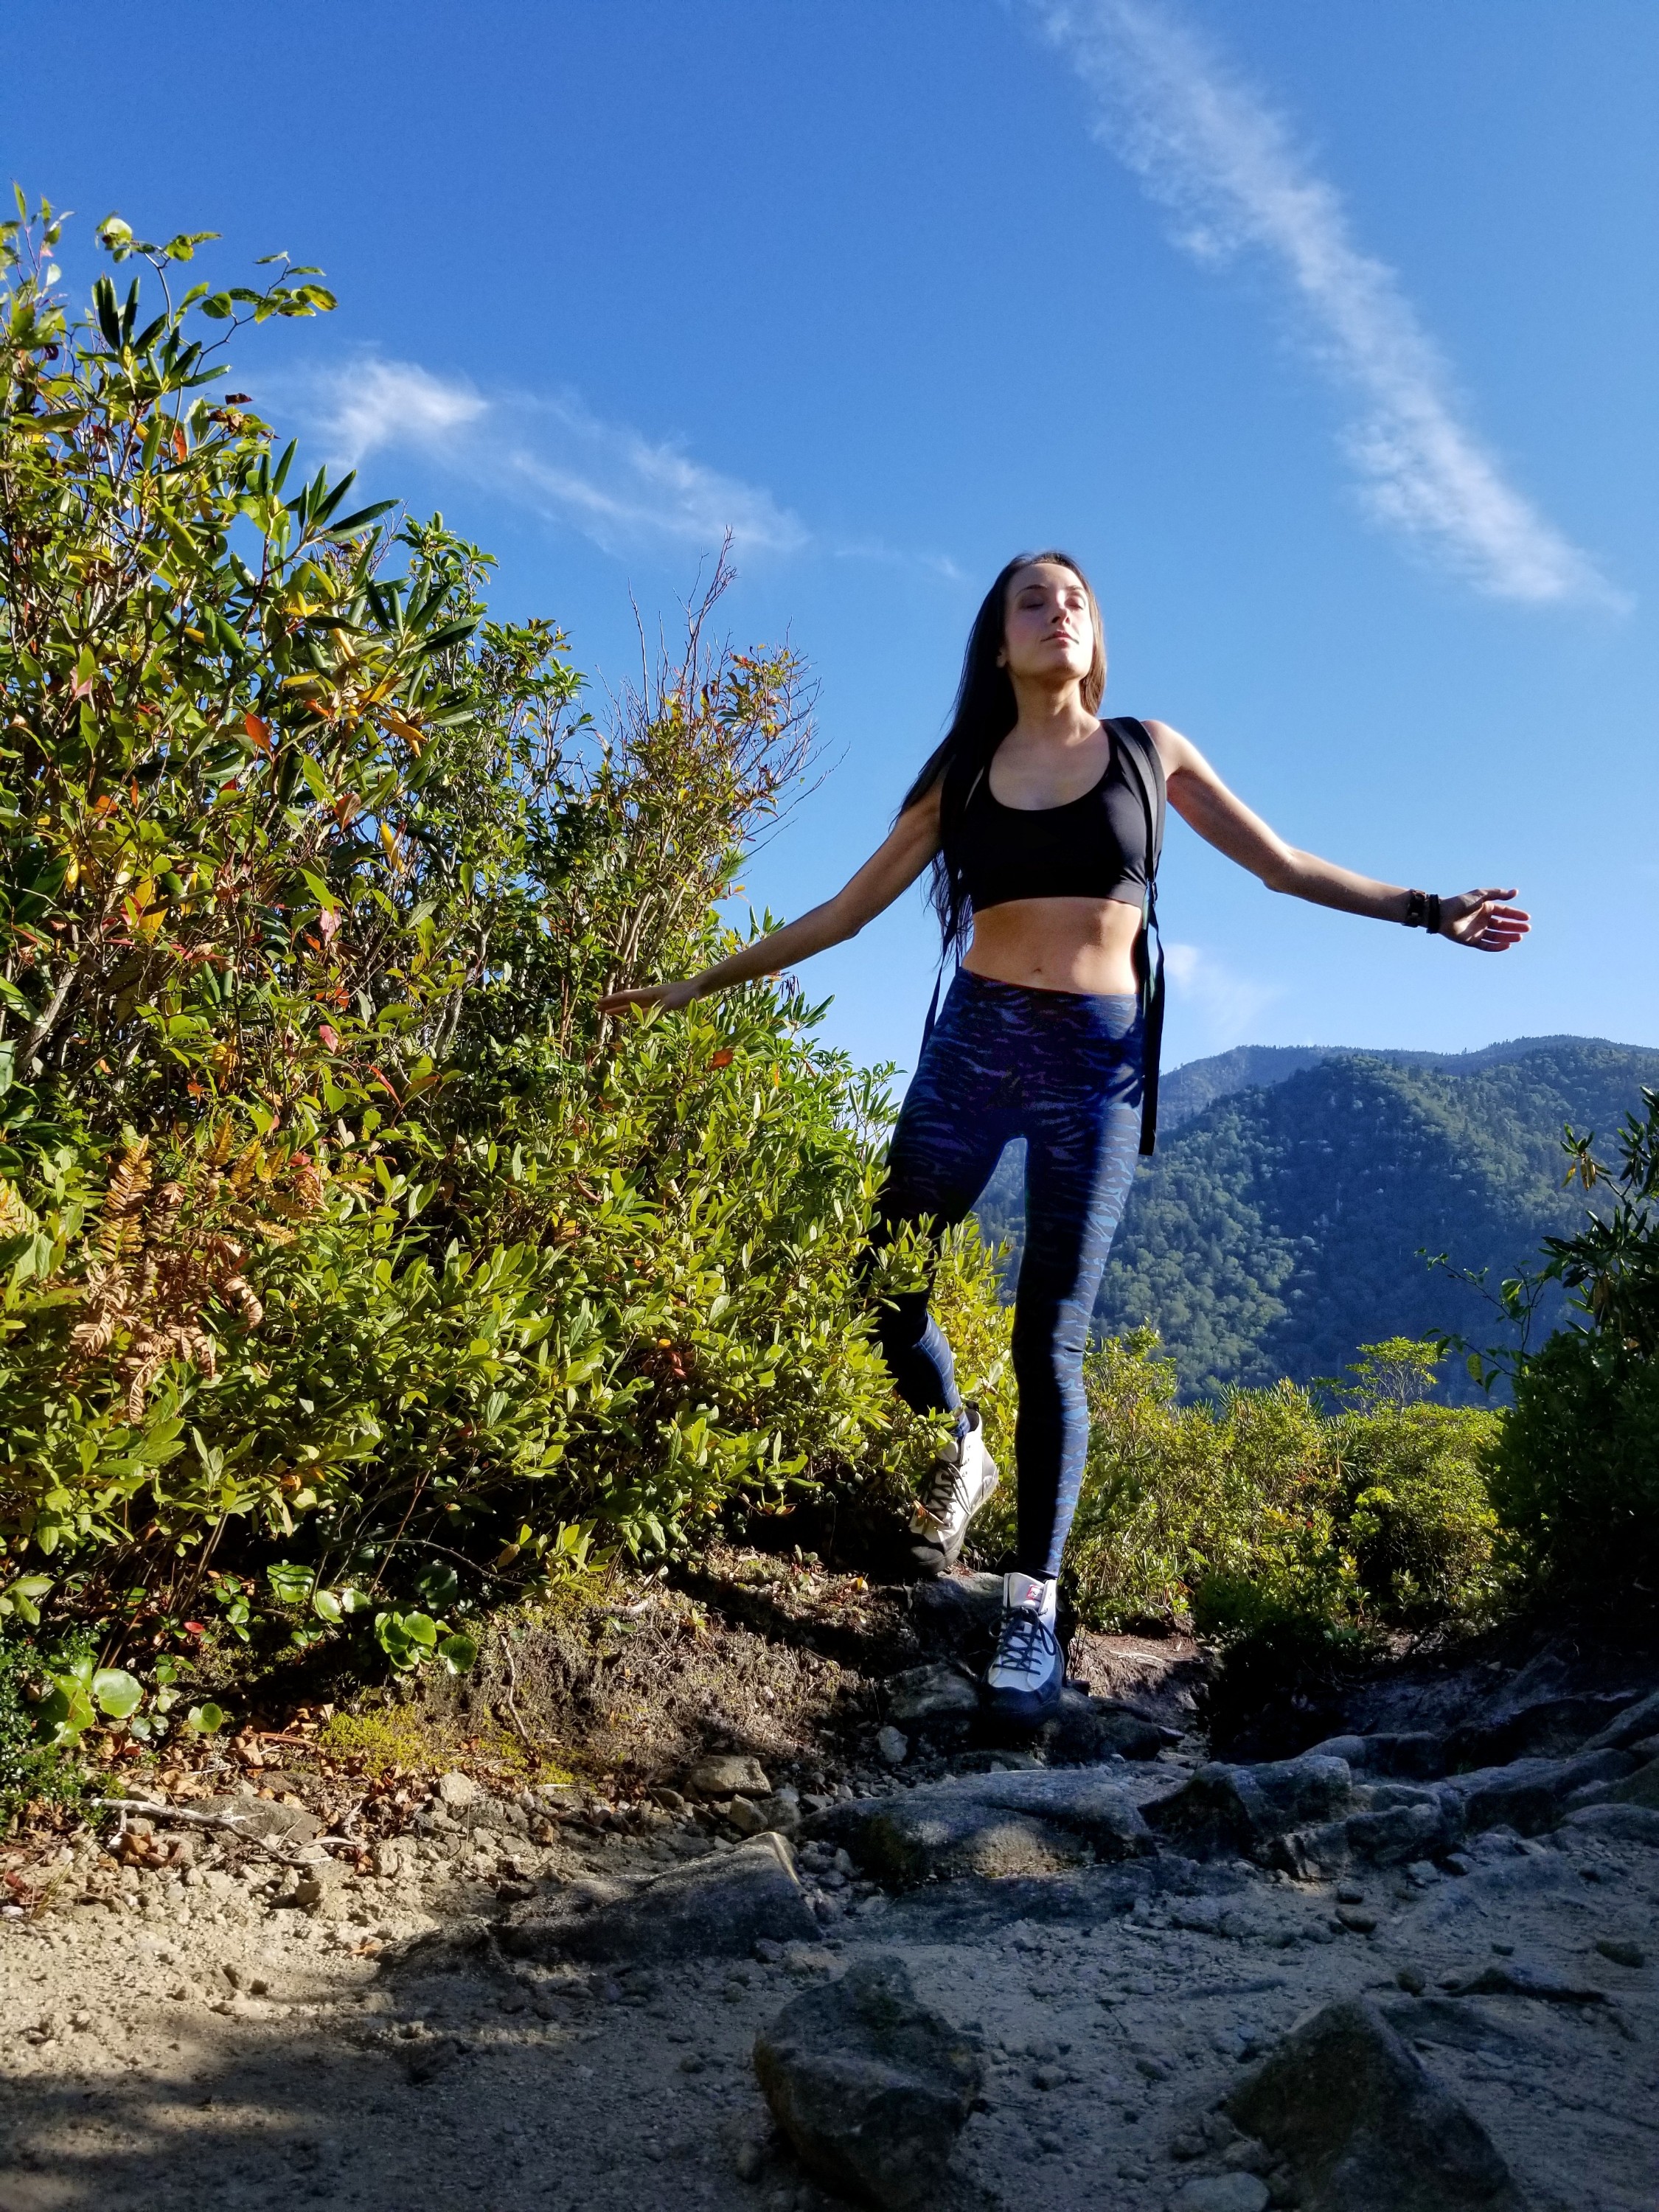 Woman with arms outstretched on a hiking path with mountains in the background